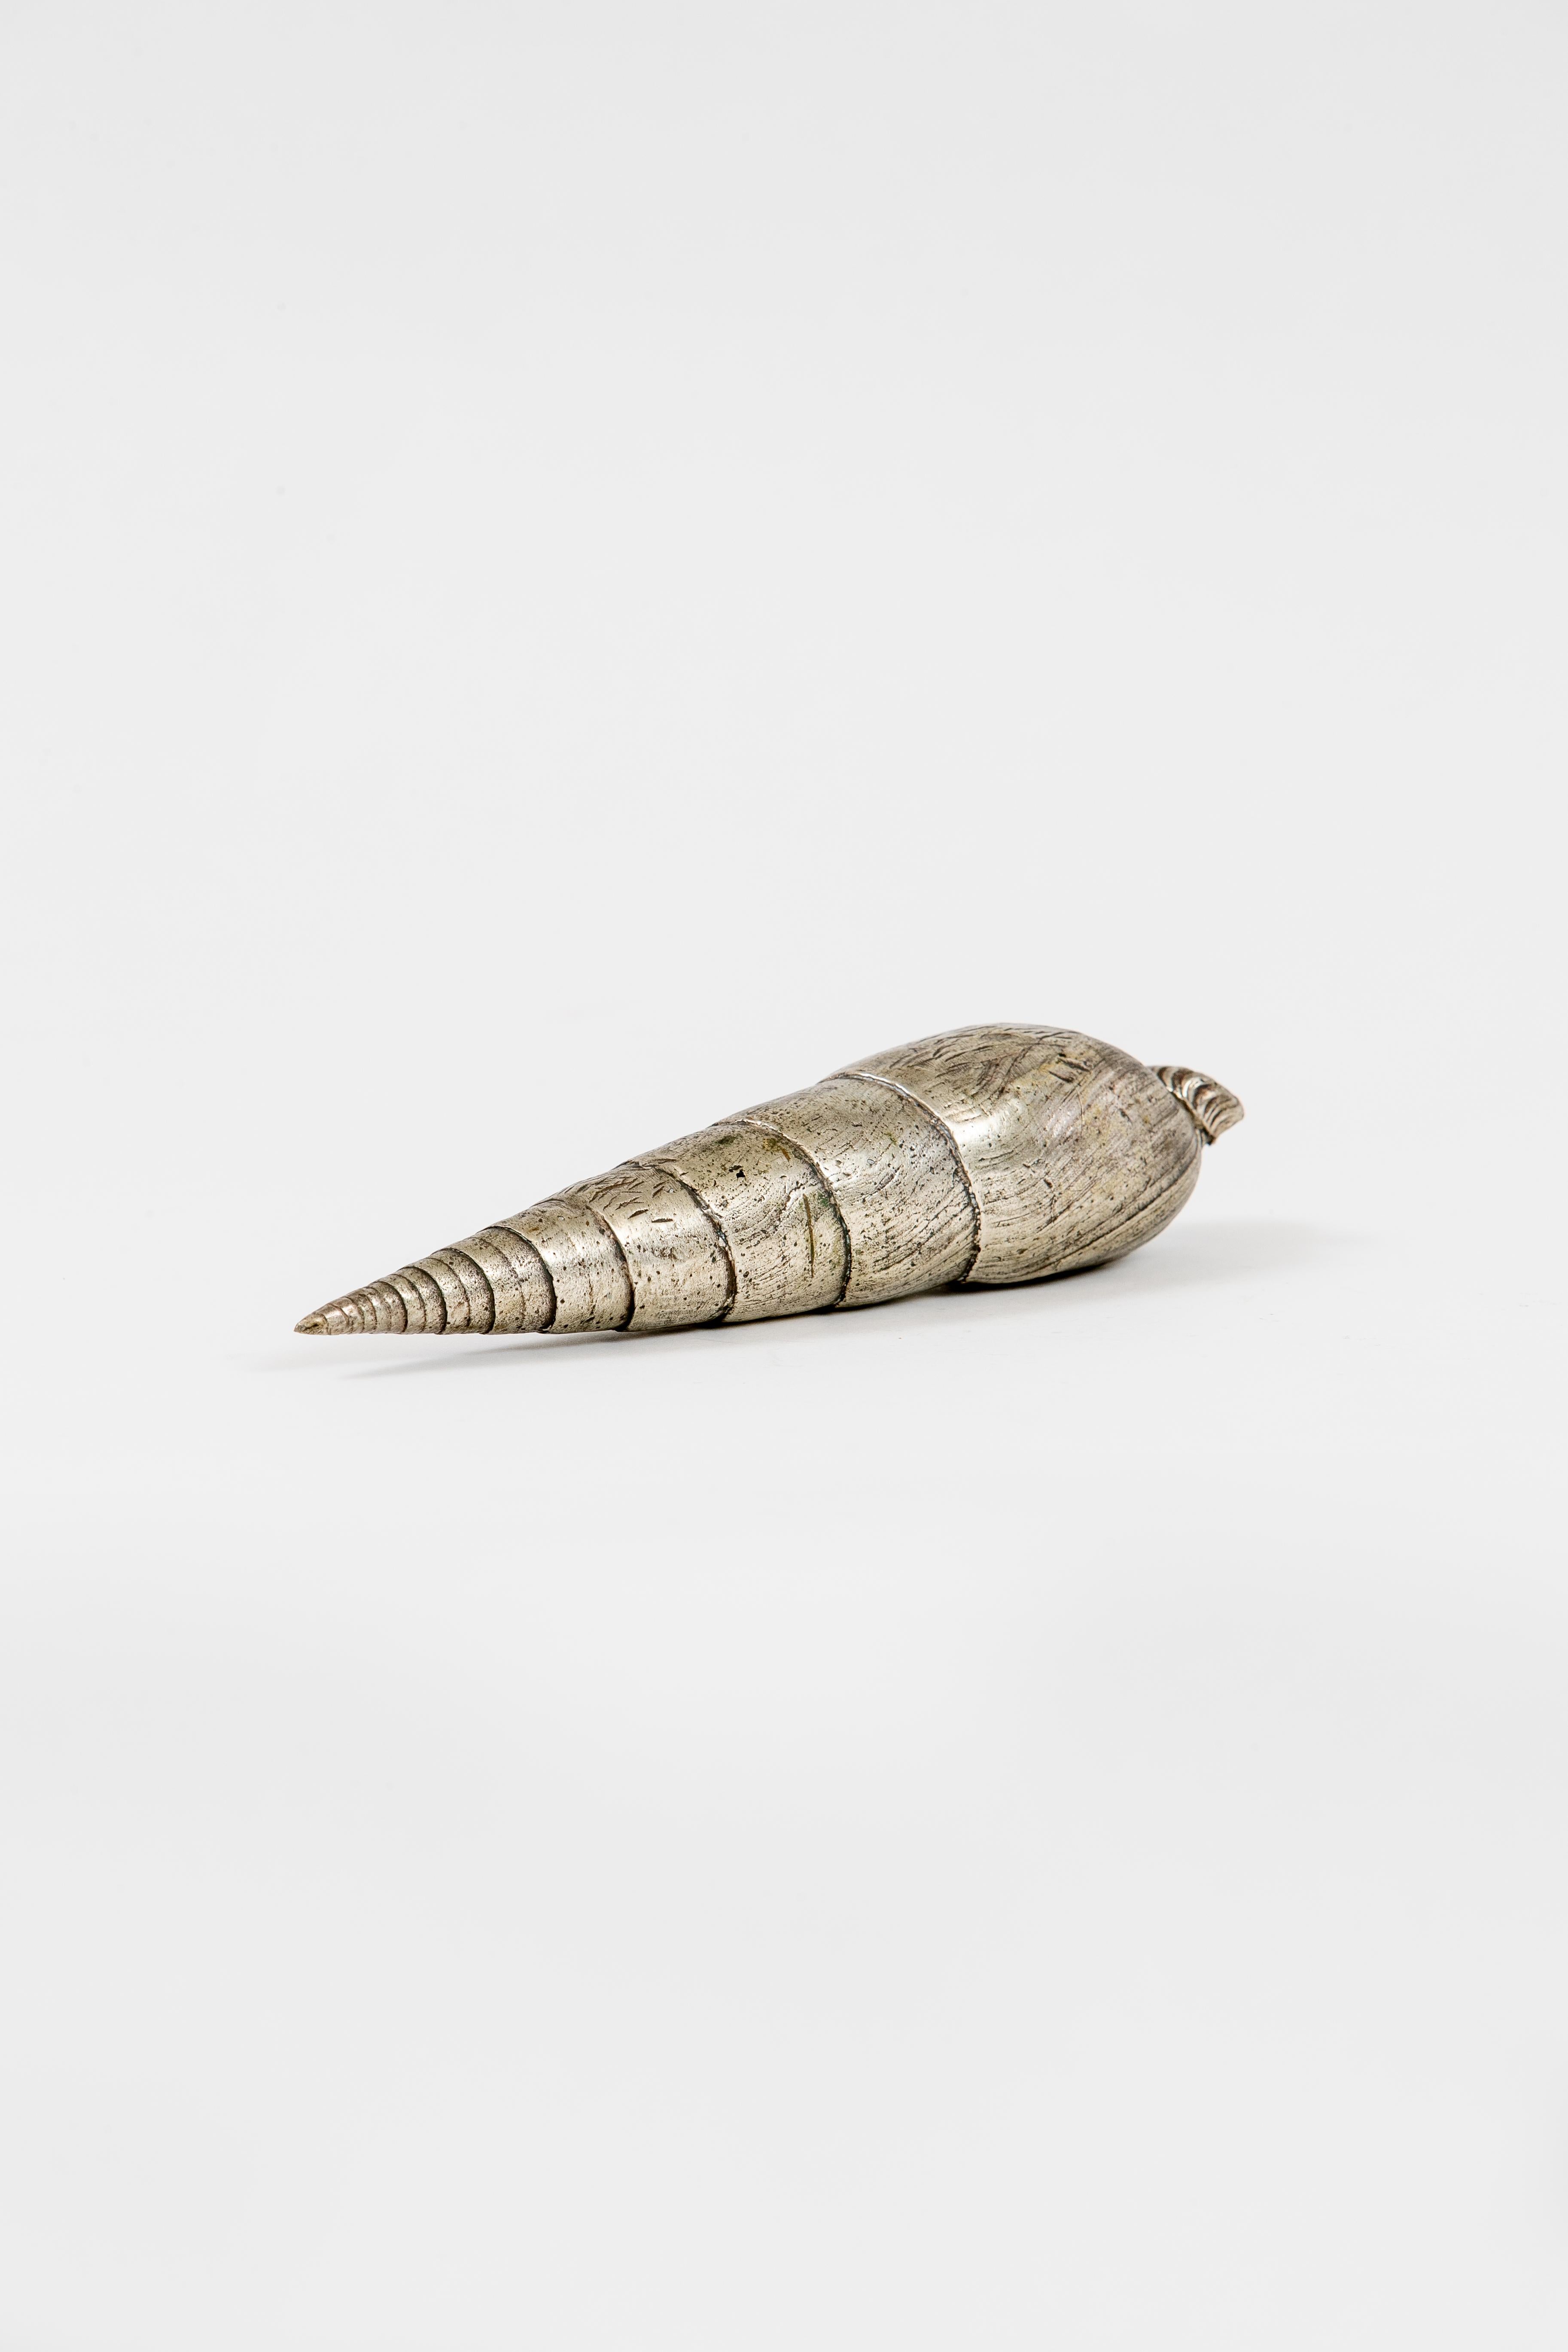 Small Solid Silvered Bronze Snail Paperweight, Italy 1960's In Good Condition In New York, NY